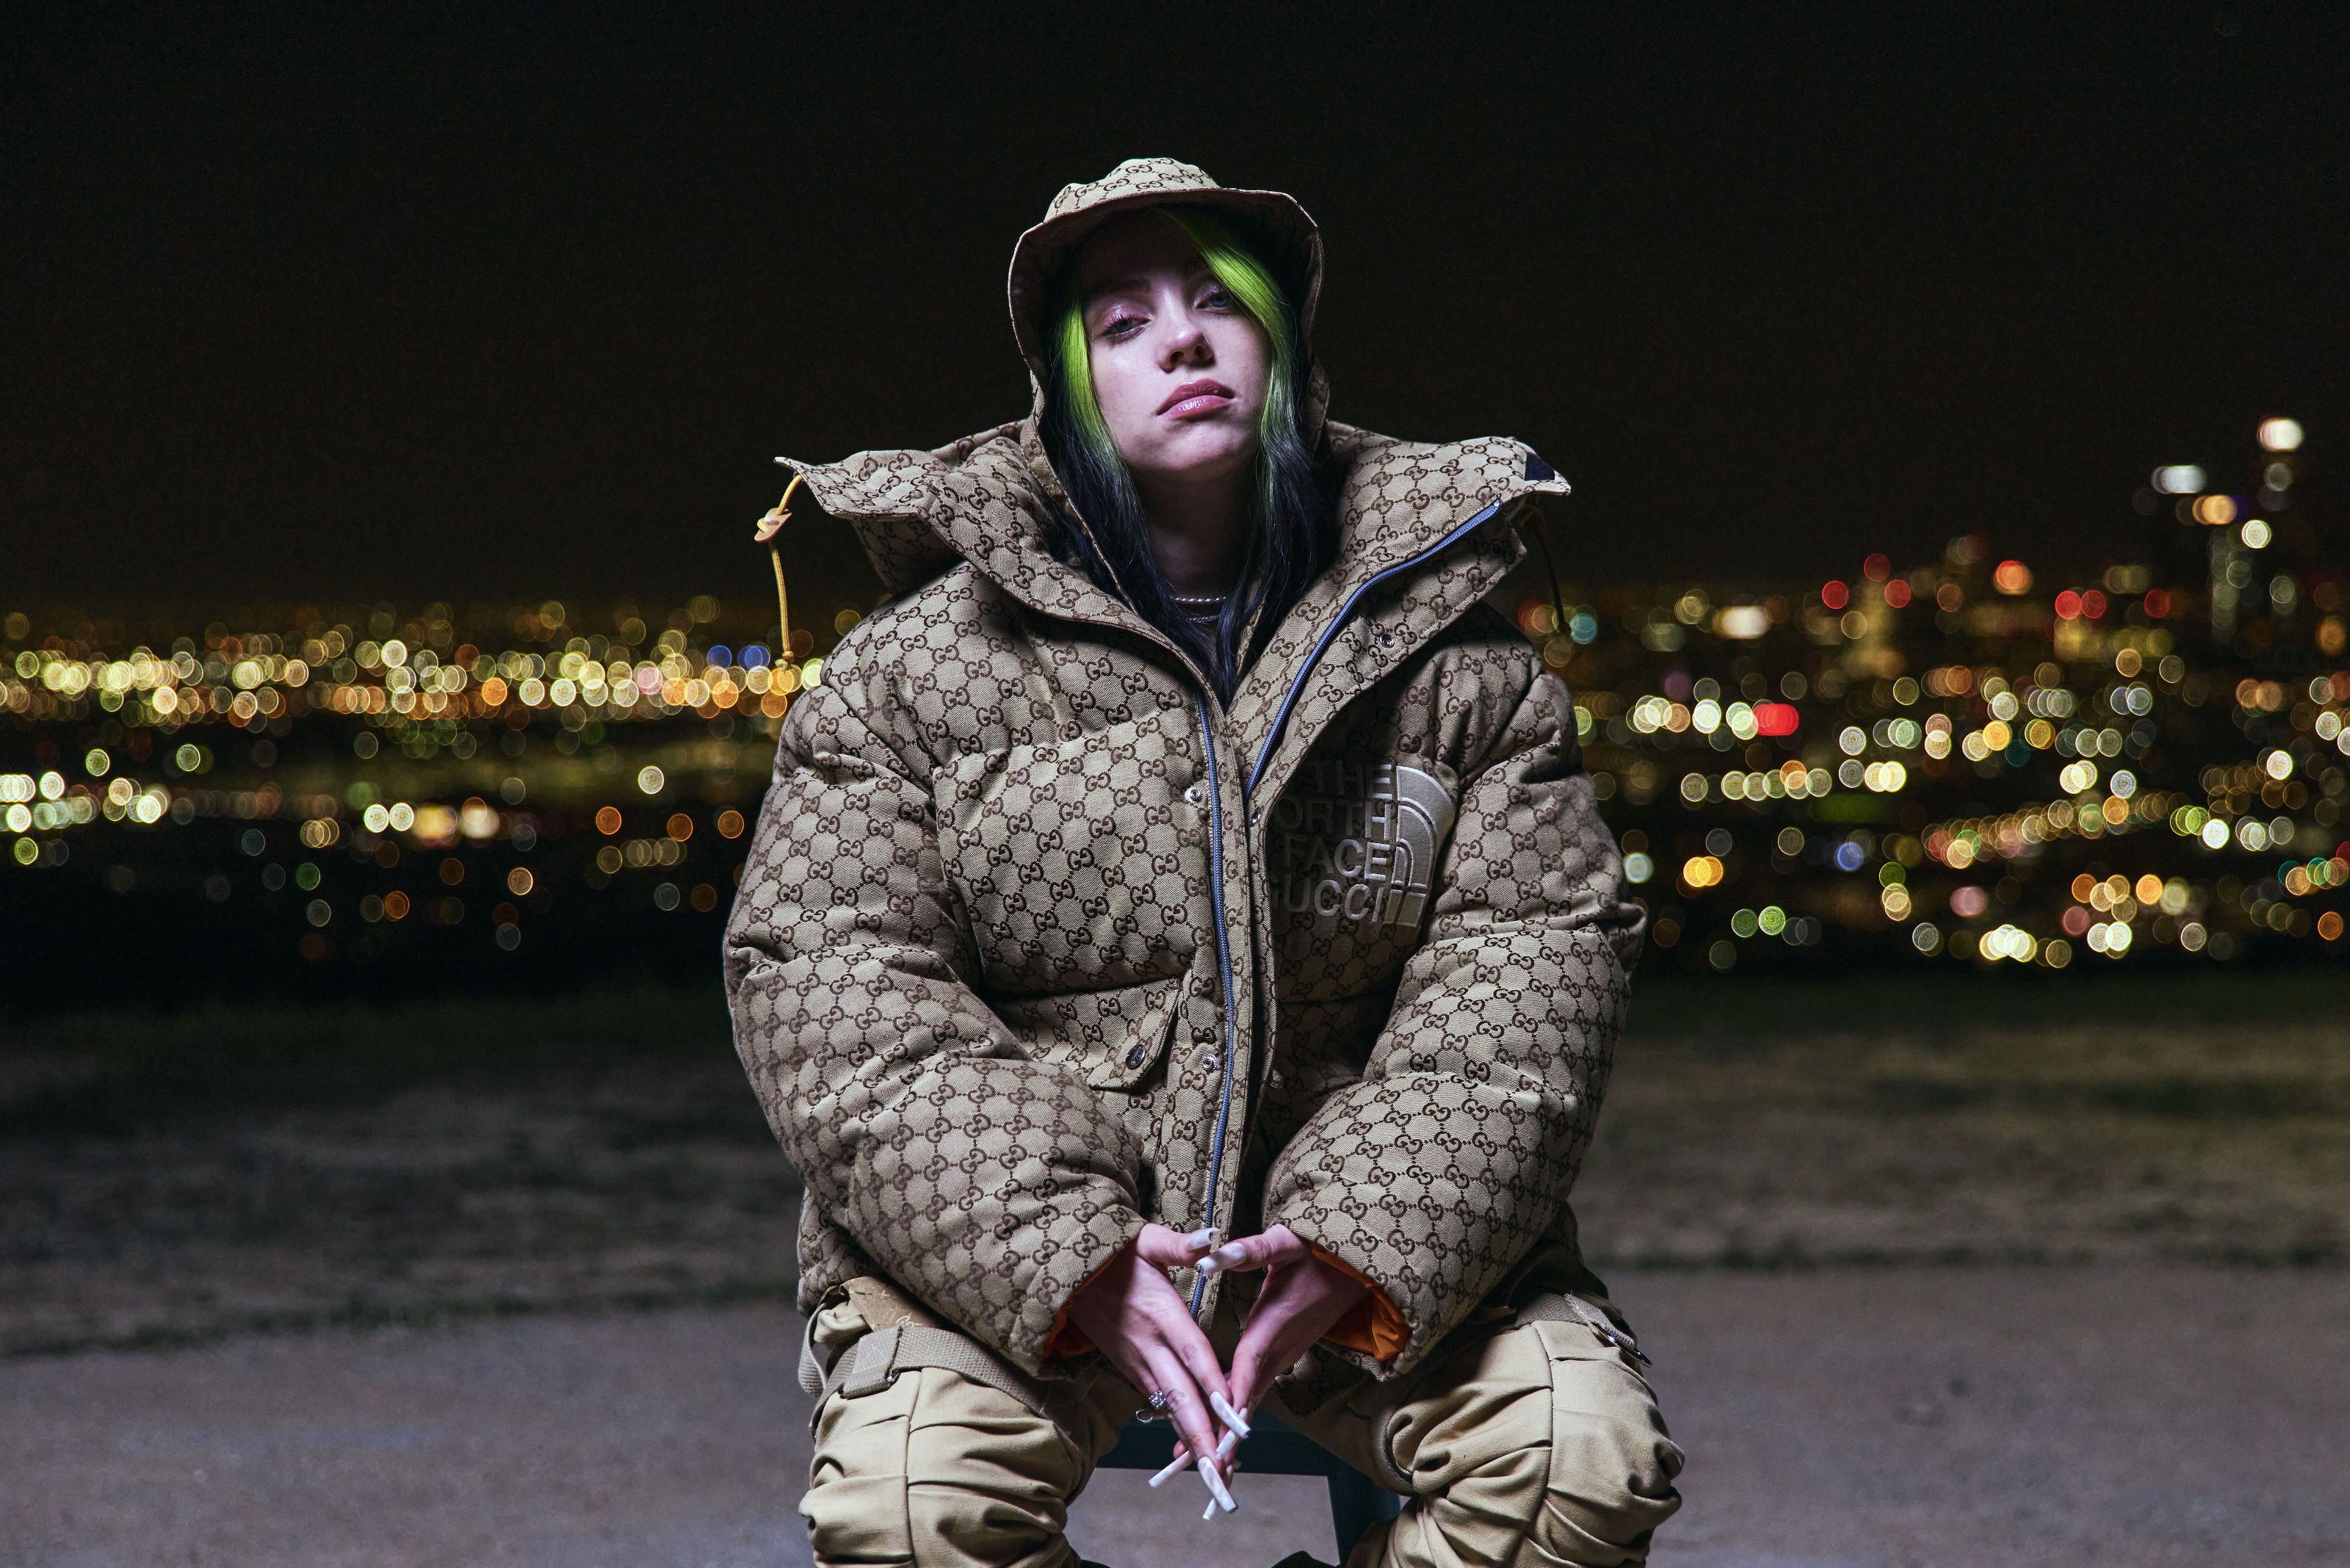 Billie Eilish: The World's A Little Blurry Is A Must See Concert Film